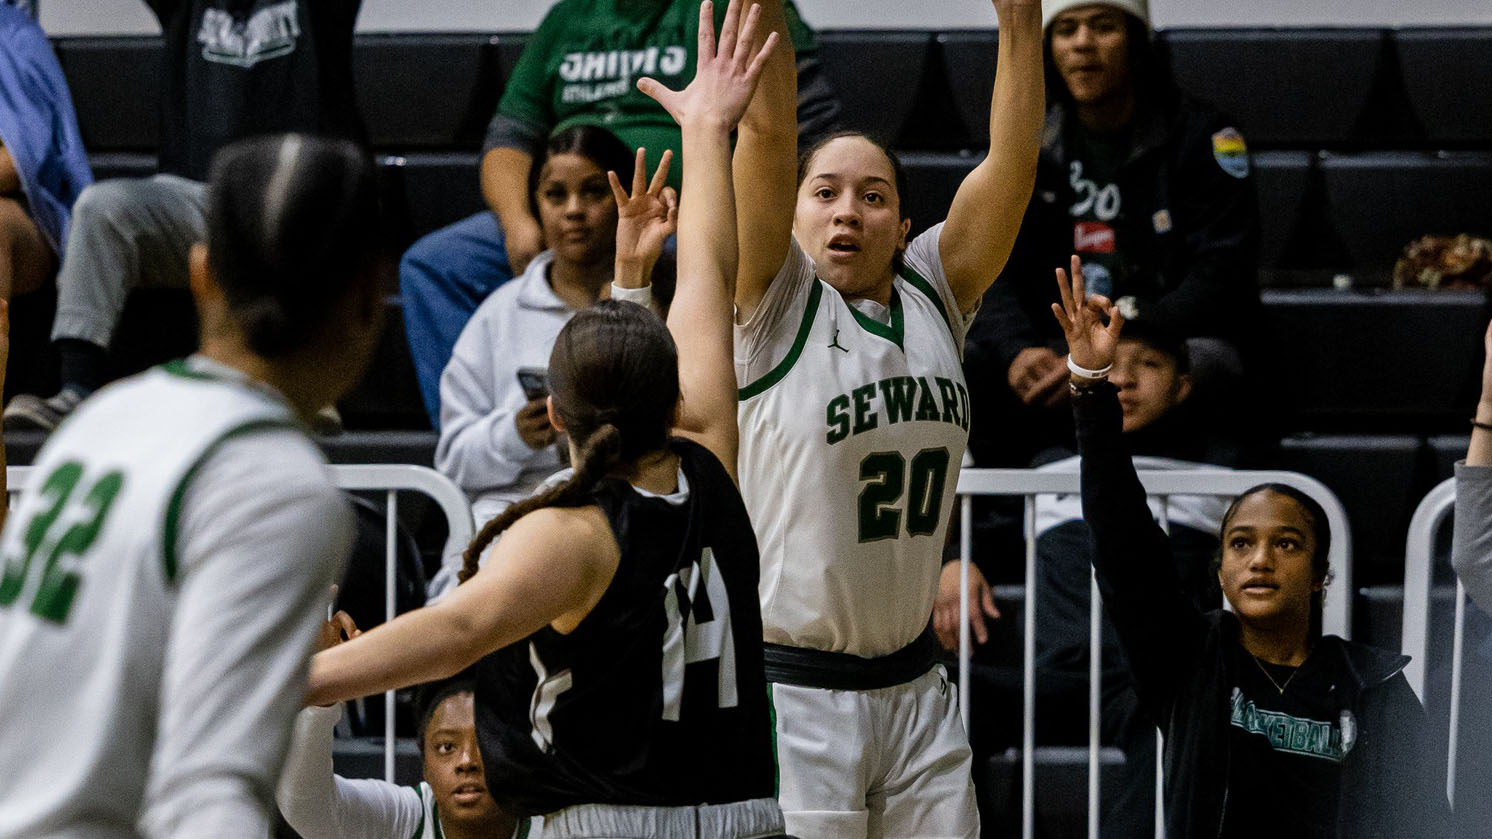 Lady Saints Knock Off Beavers for Third Straight Win